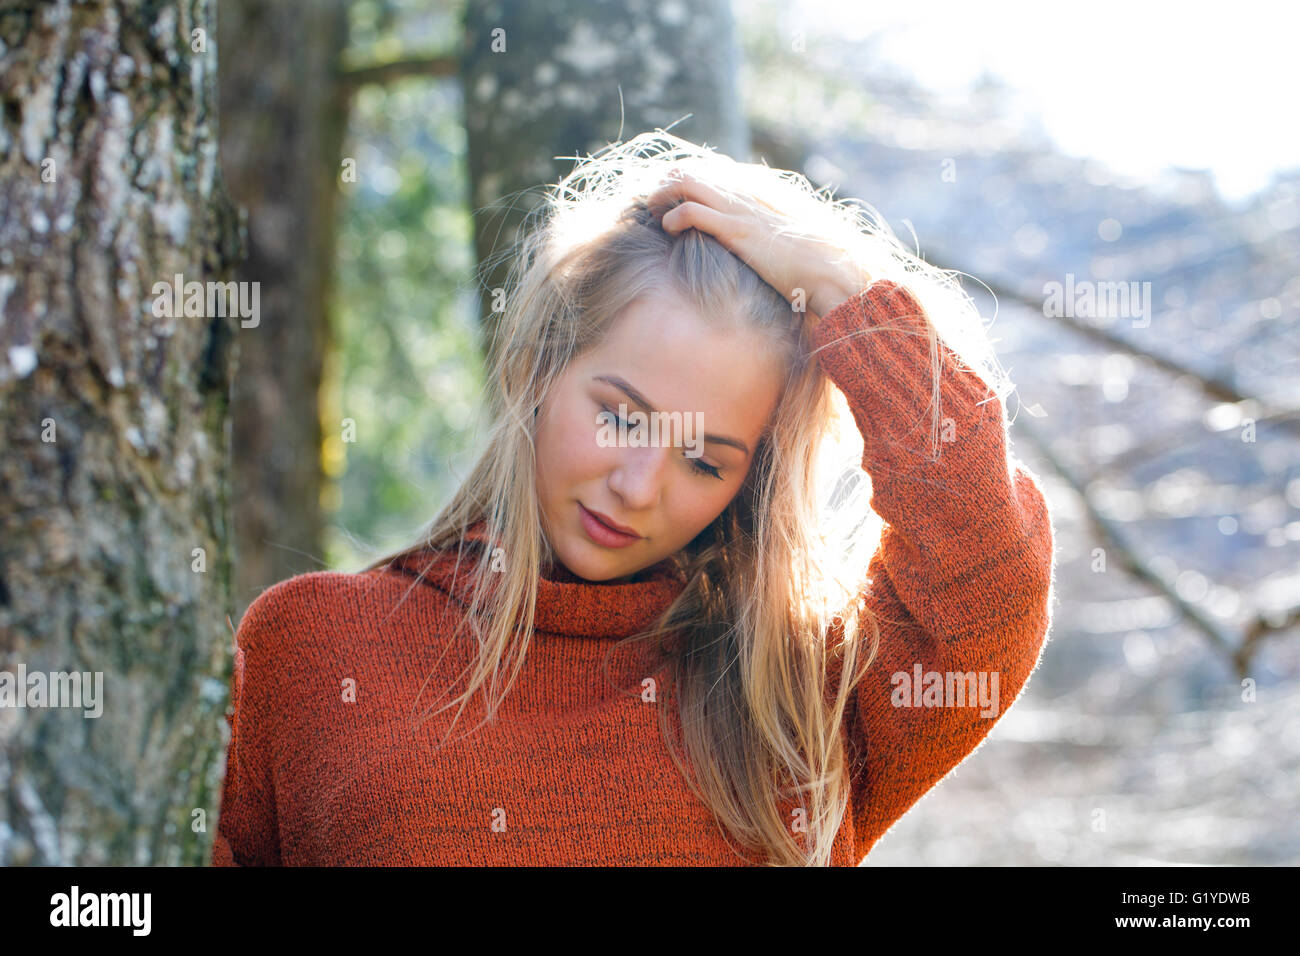 Young girl with long blond hair leaning on a tree Stock Photo